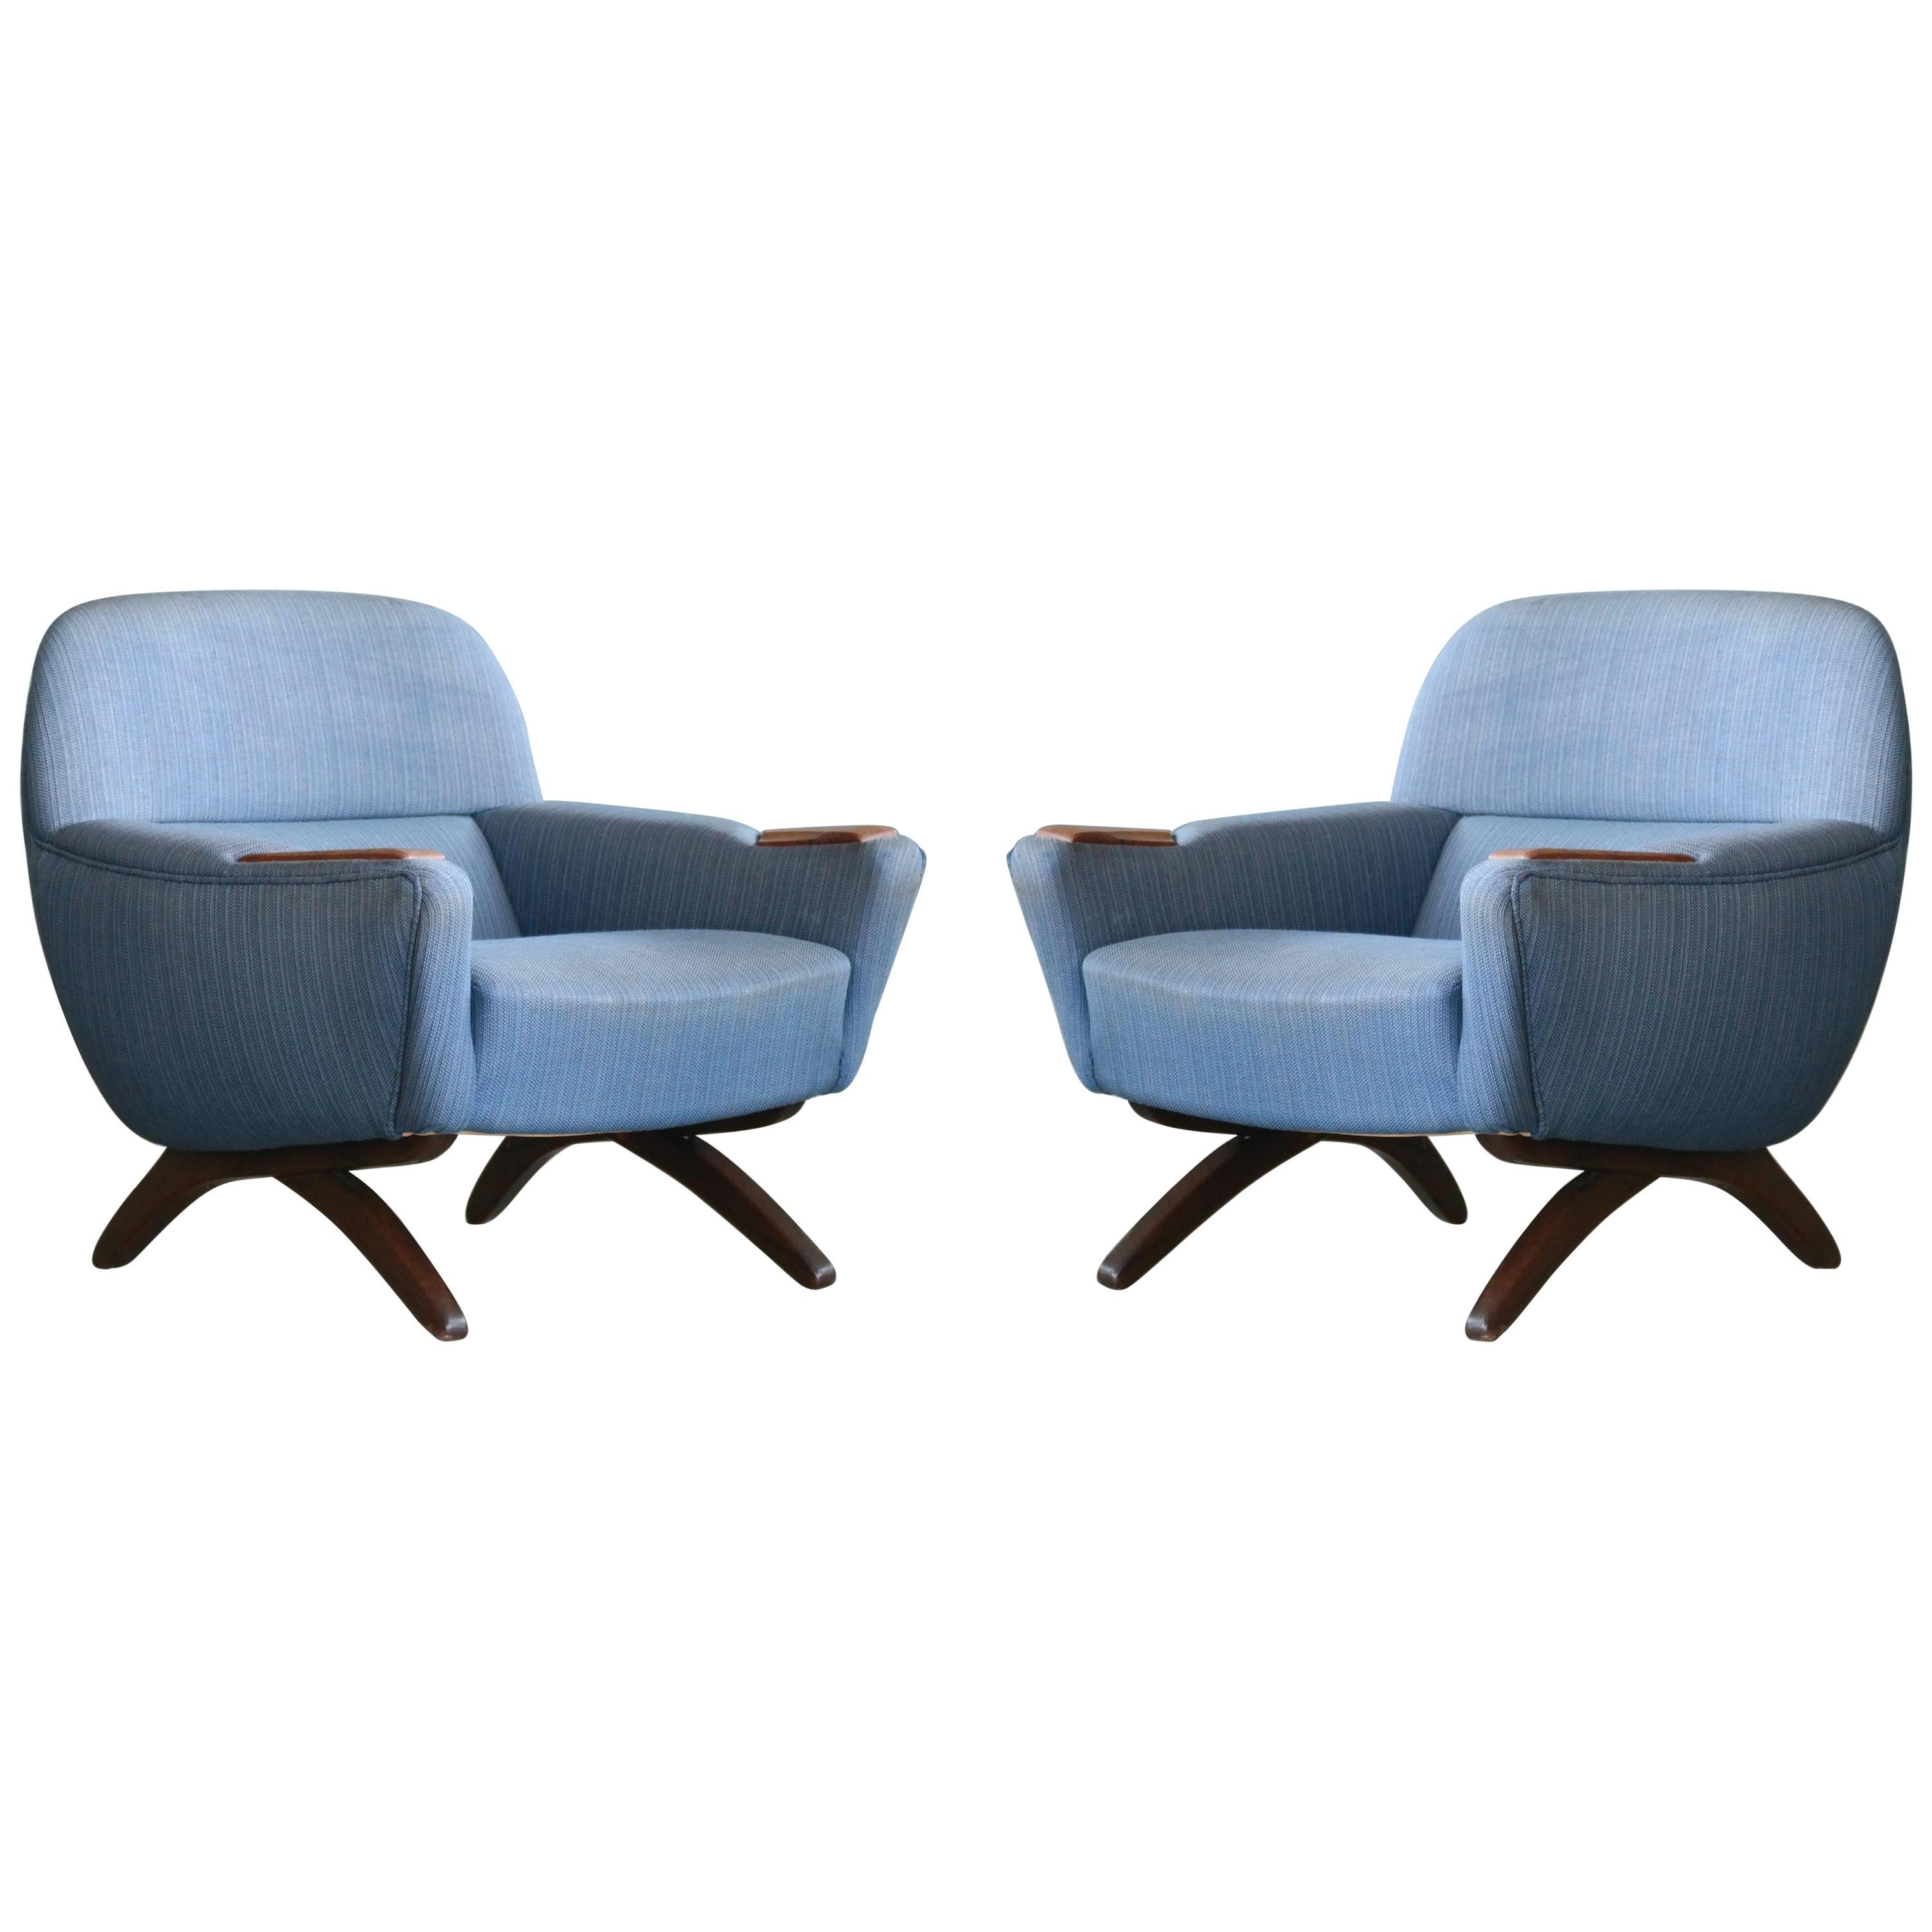 Two Danish Midcentury Leif Hansen Model Geisha Lounge Chairs with Rosewood